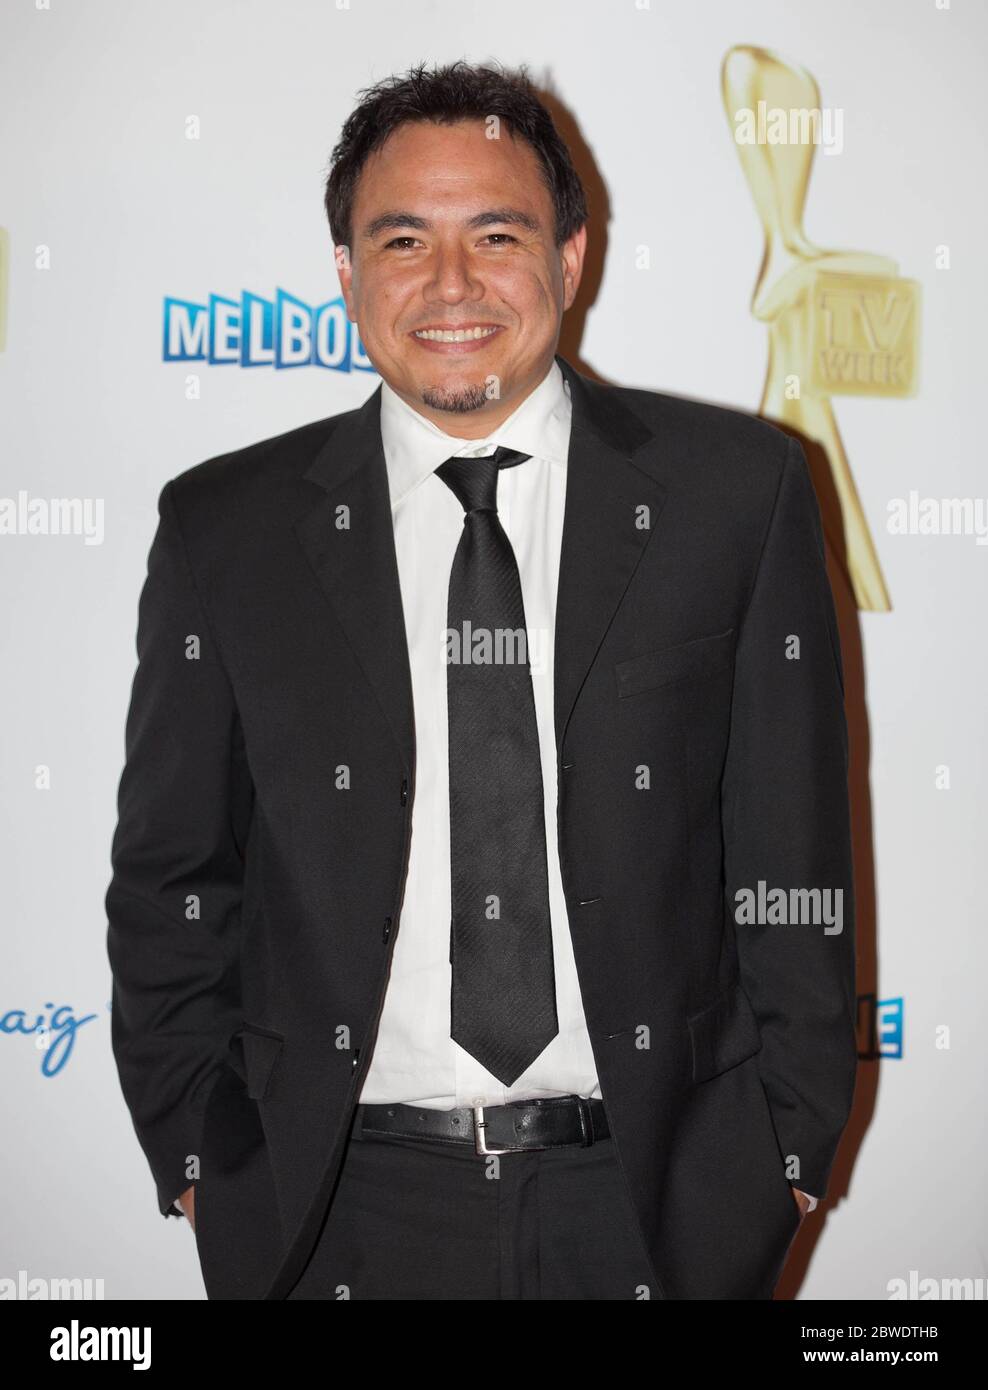 Sam Pang arriving at at the 2011 Logie Awards ceremony at Crown Casino, Melbourne on Sunday May 1st, 2011. Stock Photo